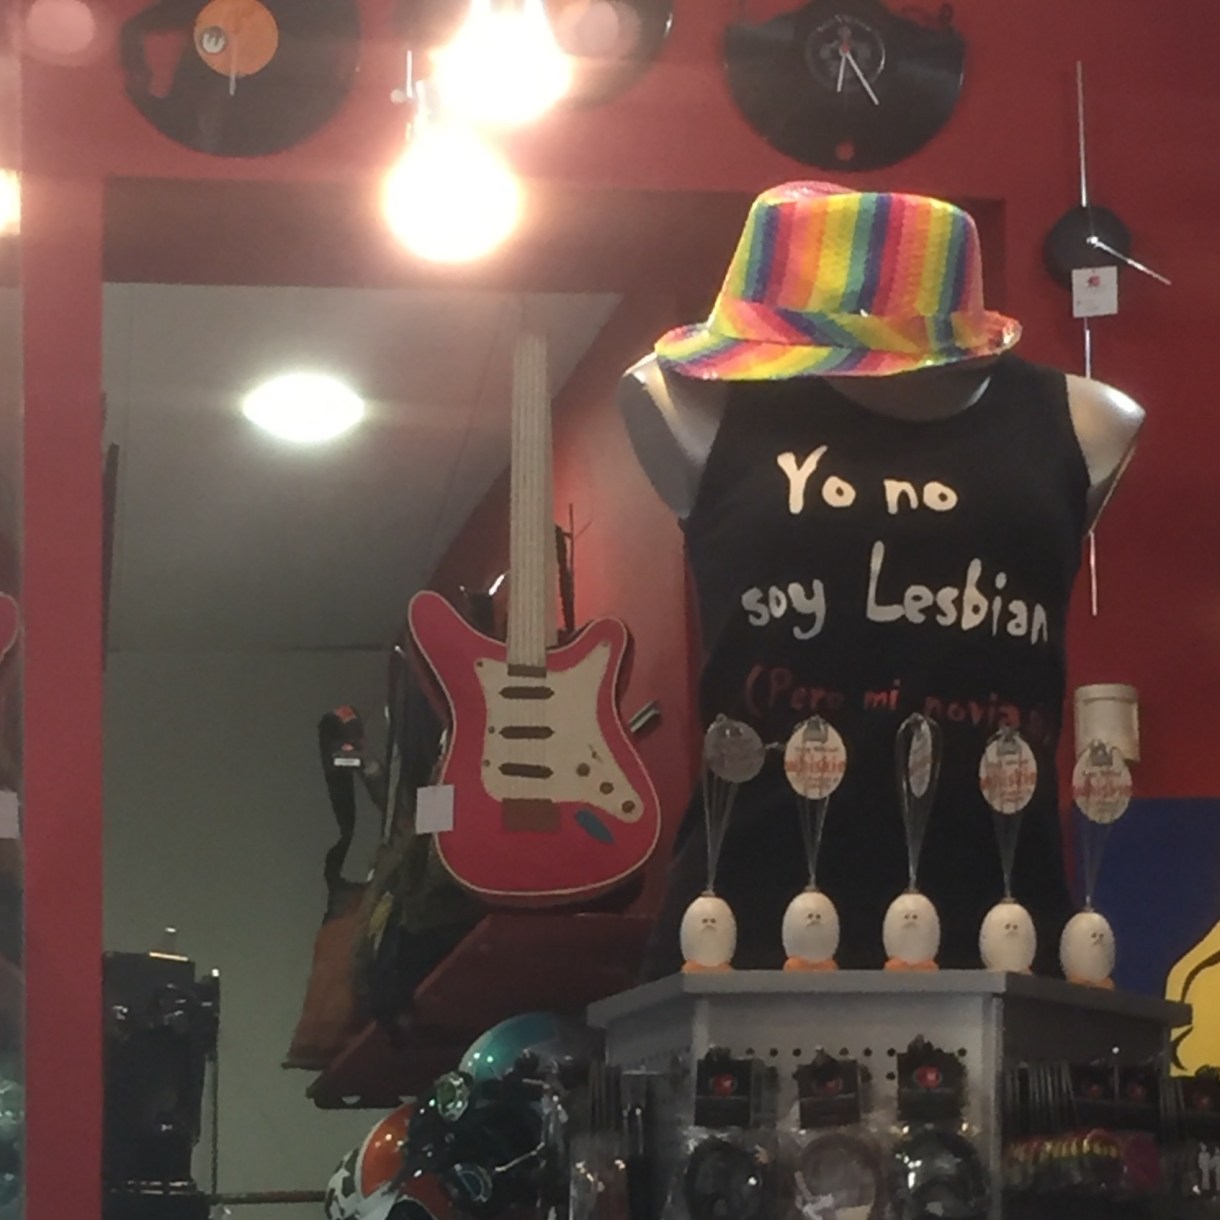 Found some cool fashion - translates to “I’m not a lesbian but my girlfriend is”